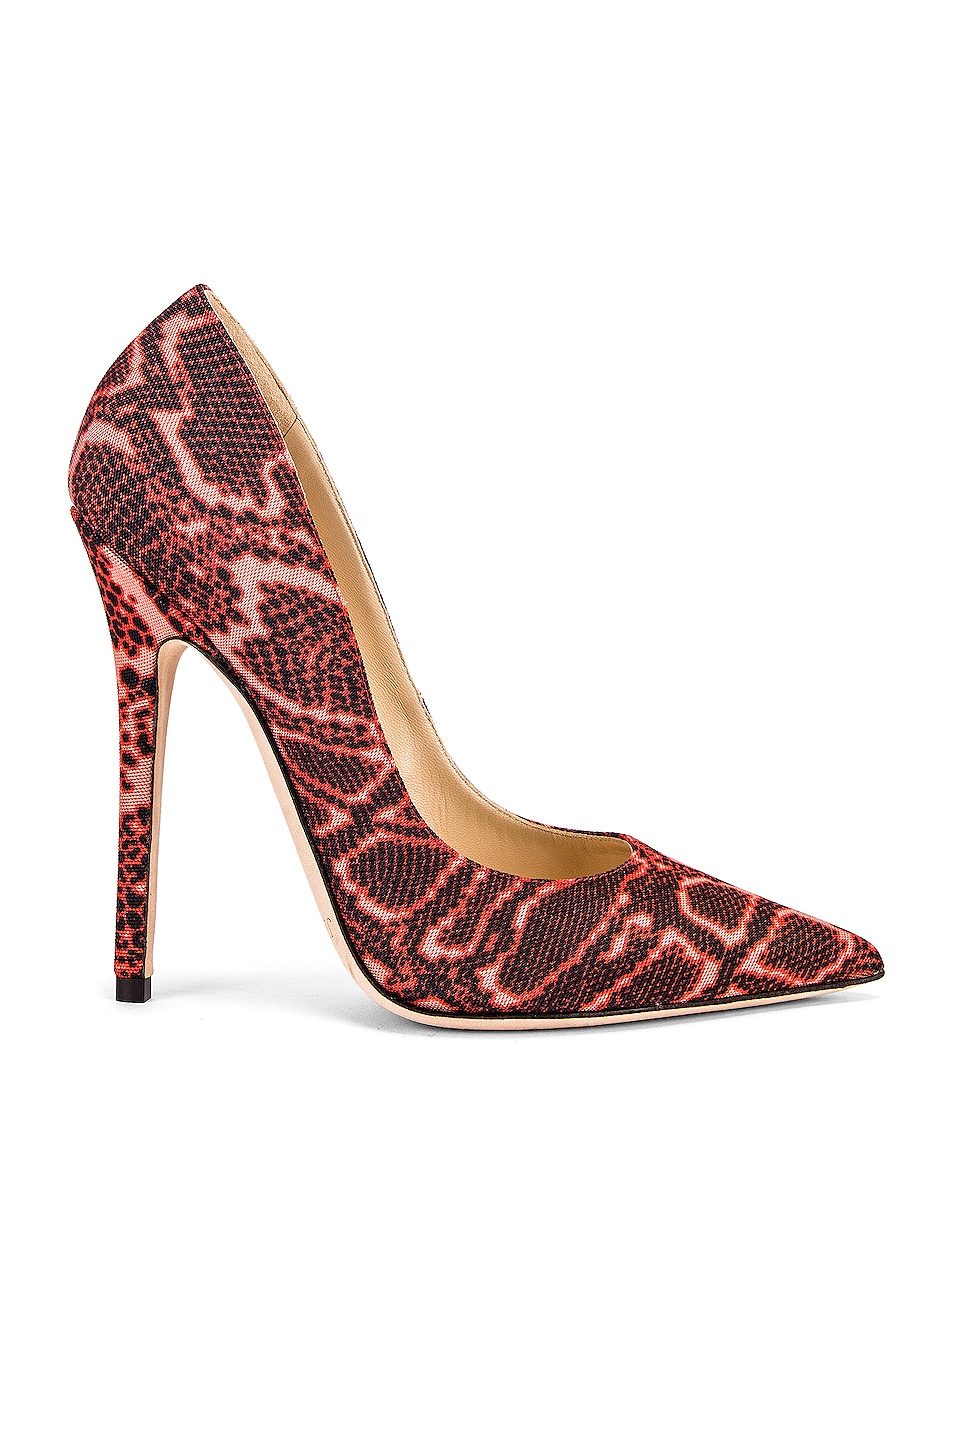 Image 1 of Jimmy Choo Anouk 120 Pump in Mandarin Red Mix